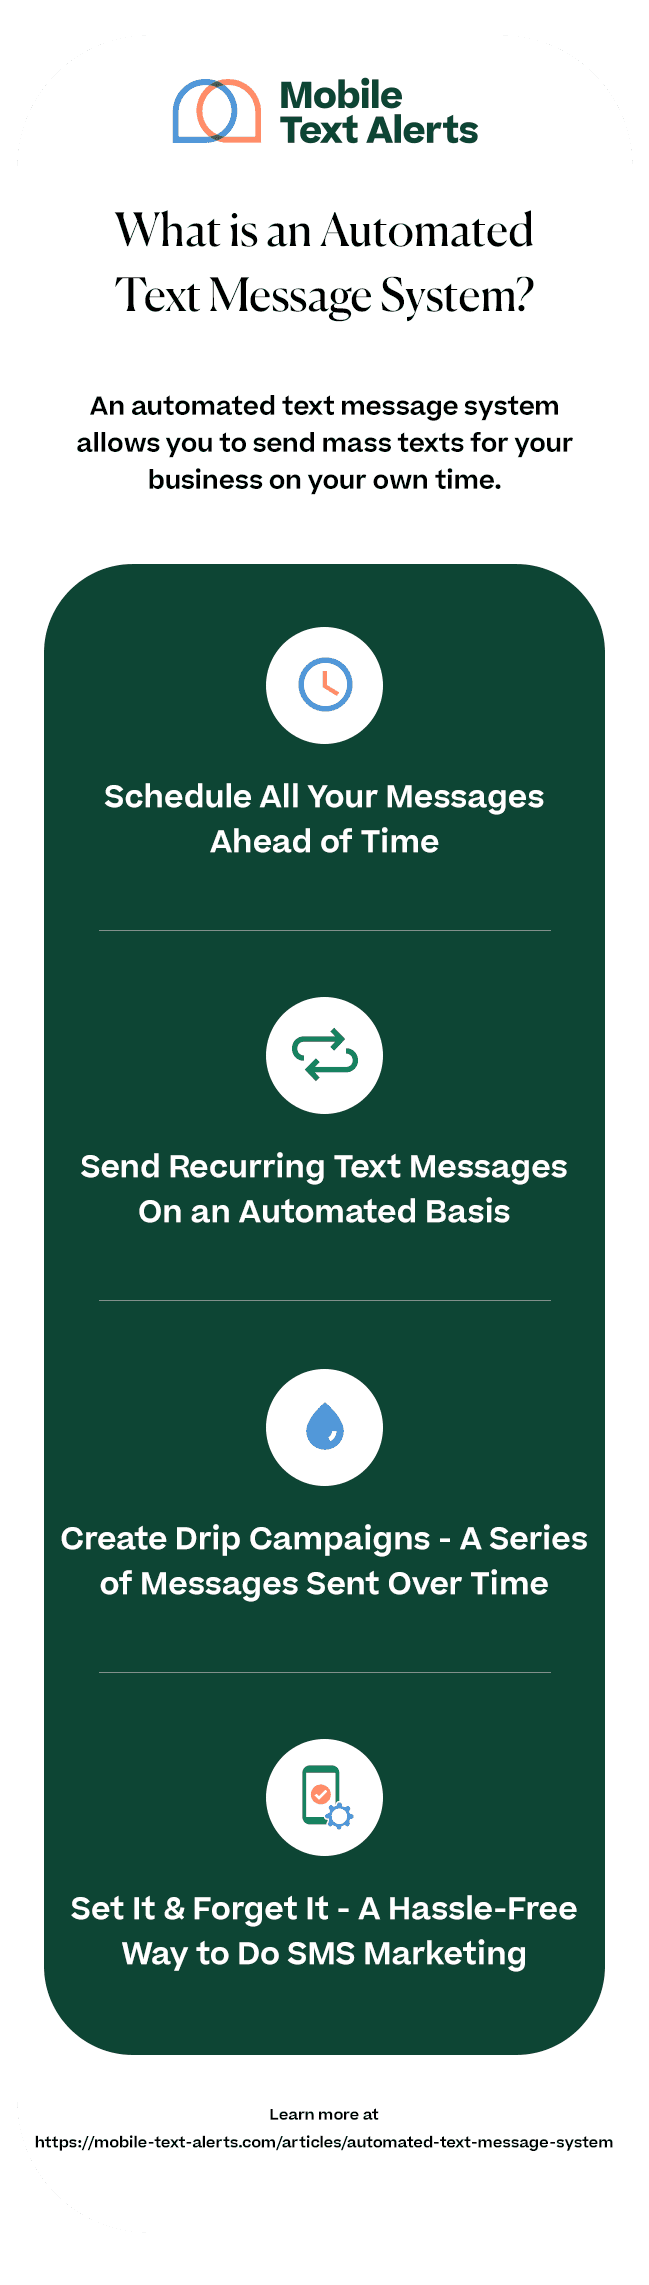 What is an automated text message system infographic